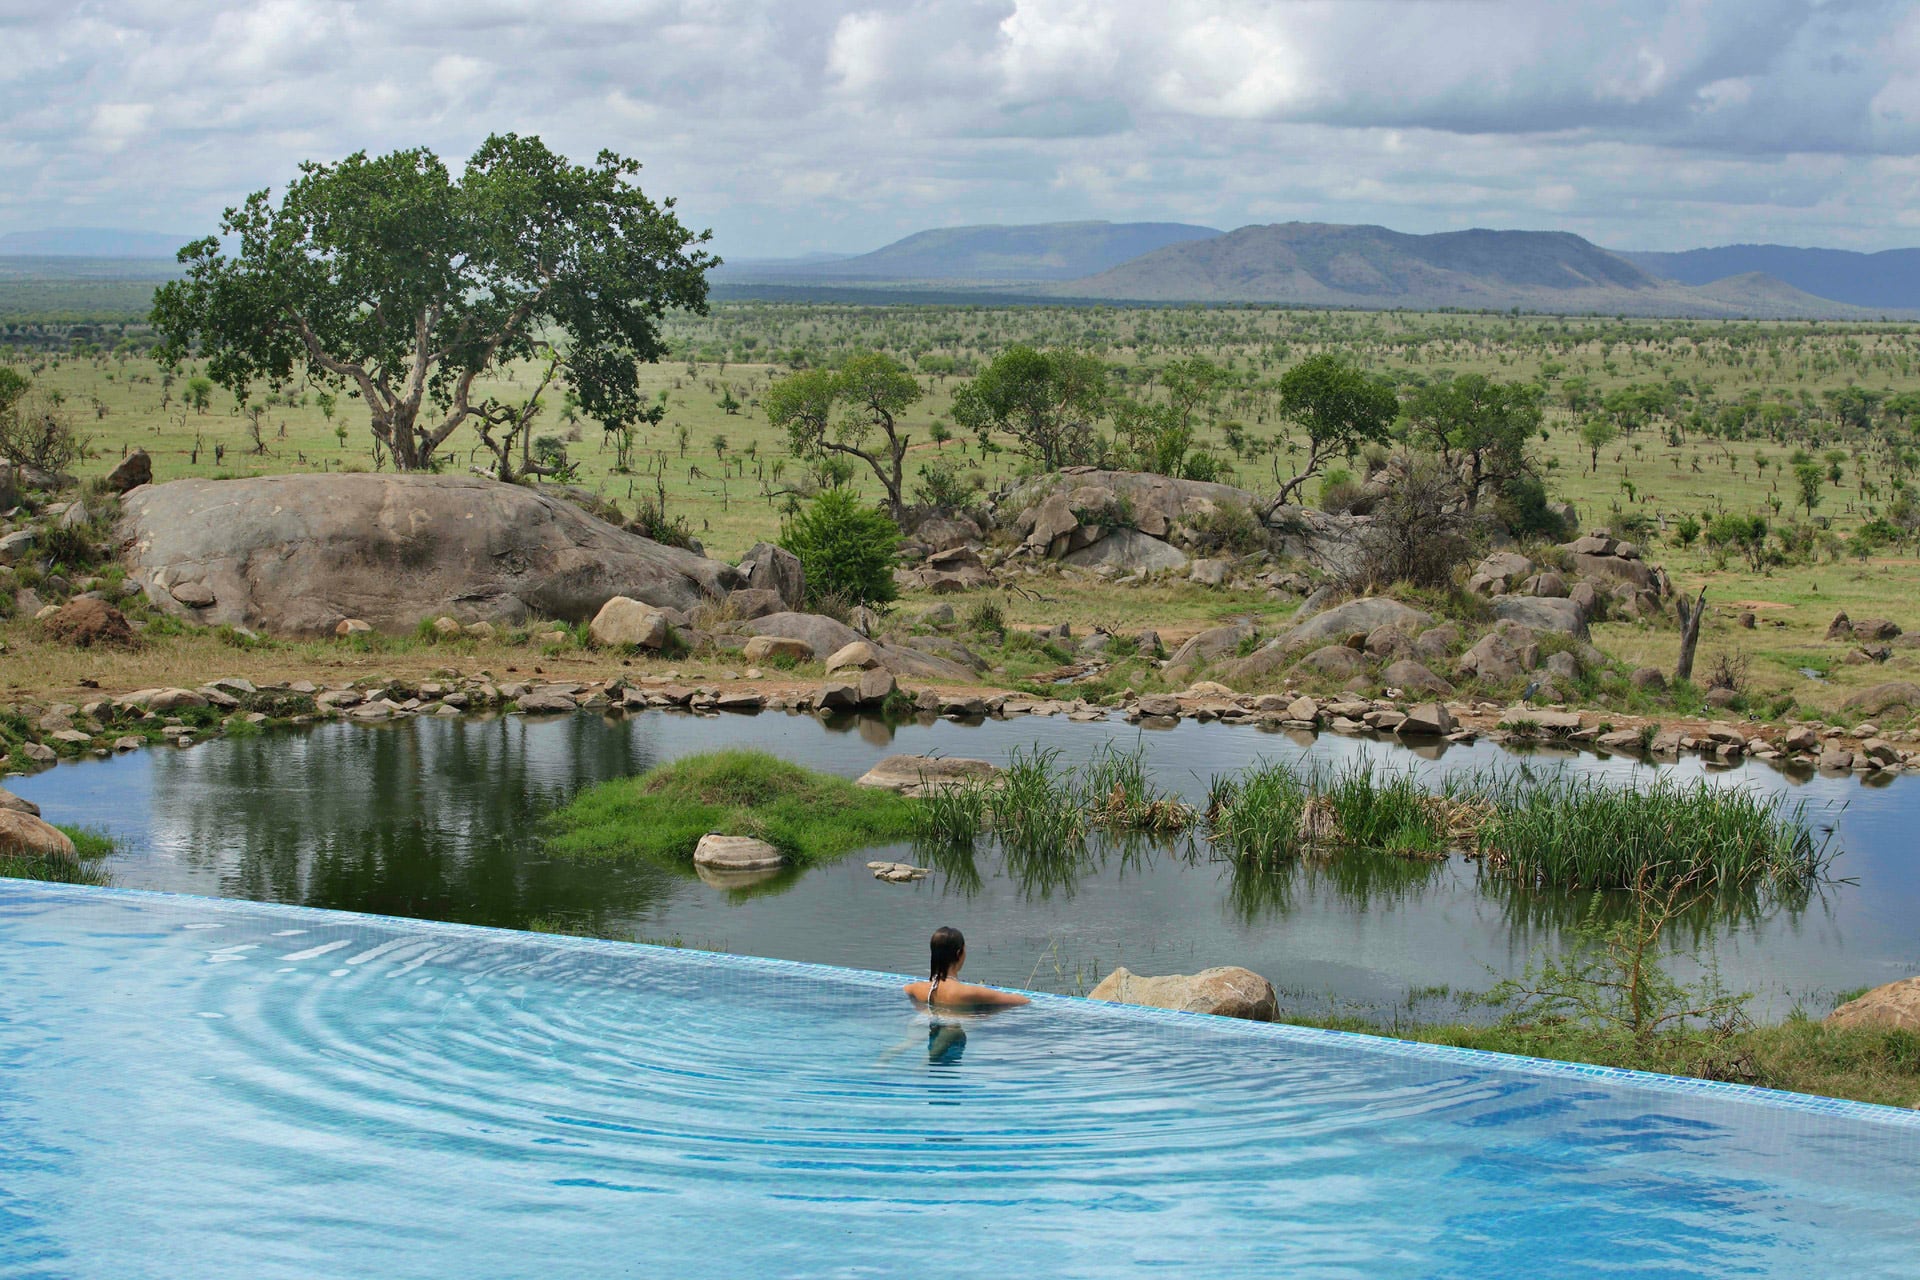 The infinity pool overlooking an active waterhole at Four Seasons Serengeti – one of our top rated eco lodges in Africa.